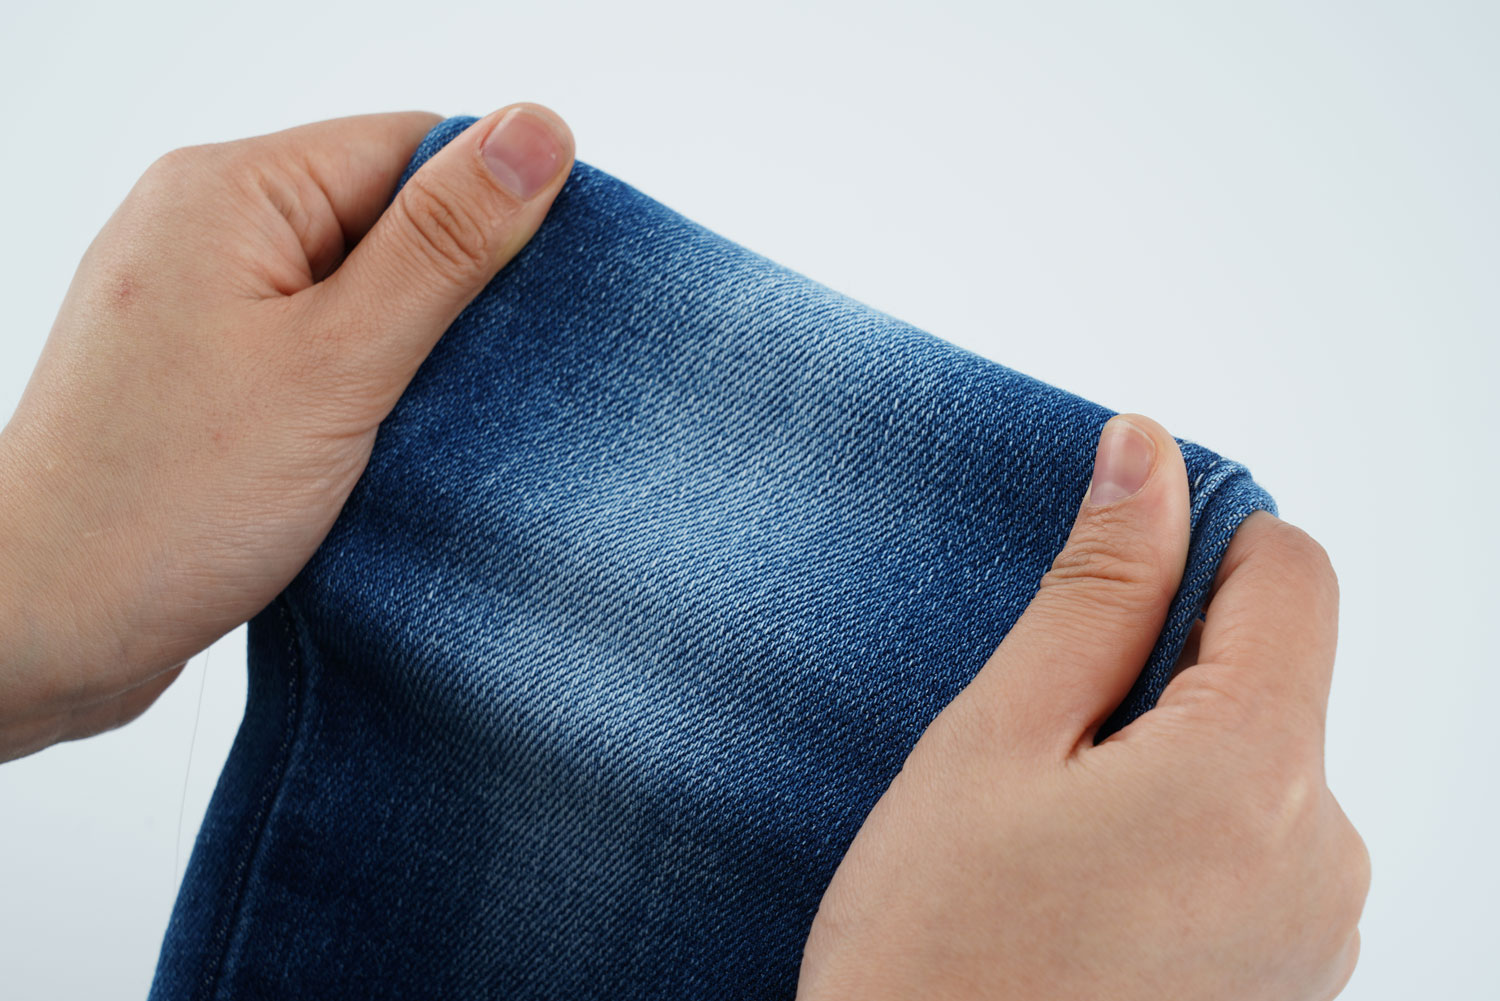 What Are the Top Factors Affecting of Stretch Denim Material? 1